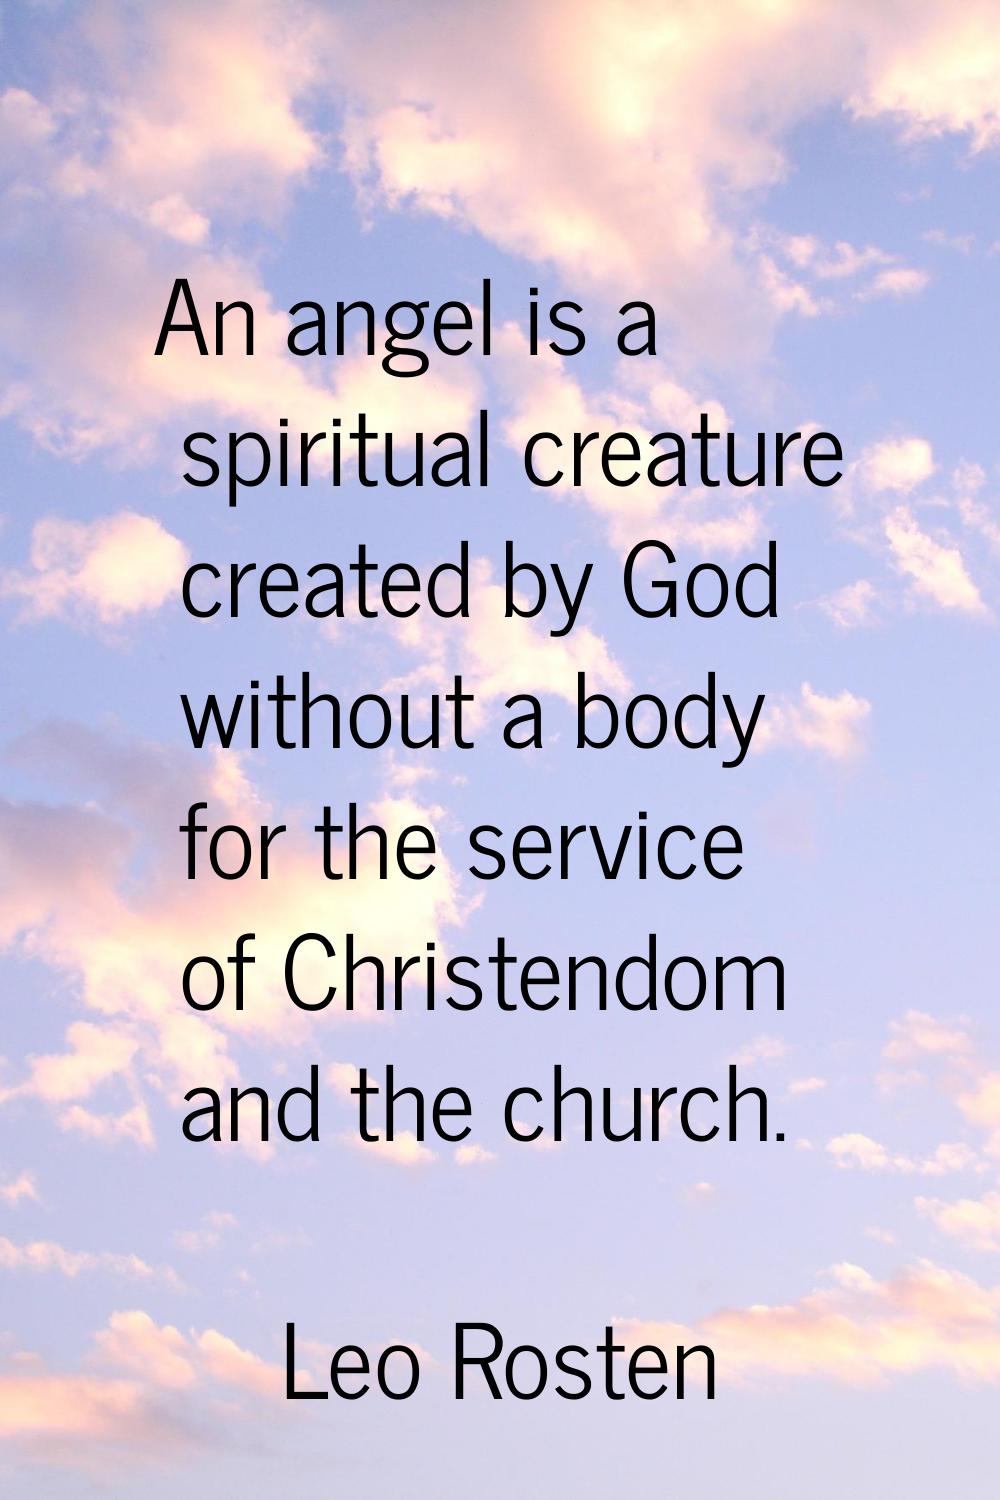 An angel is a spiritual creature created by God without a body for the service of Christendom and t